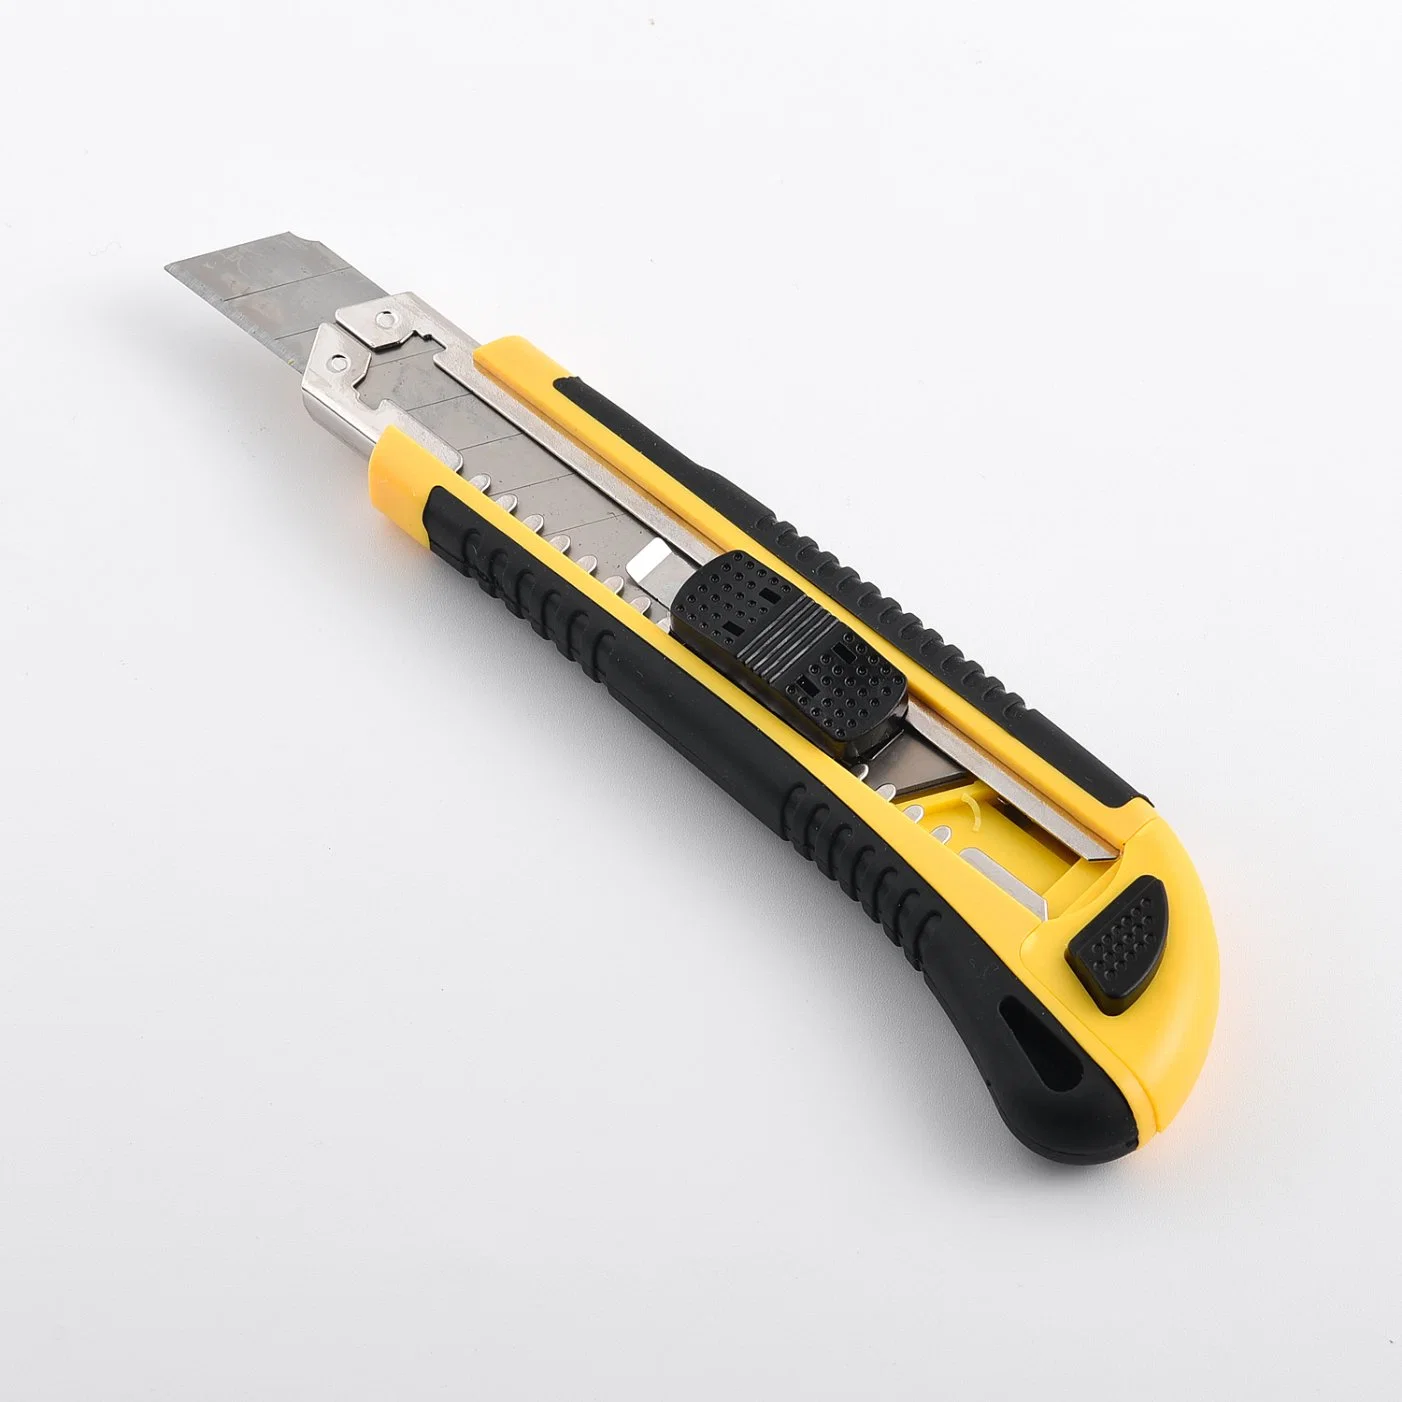 18mm Plastic Safety Utility Cutter Knife